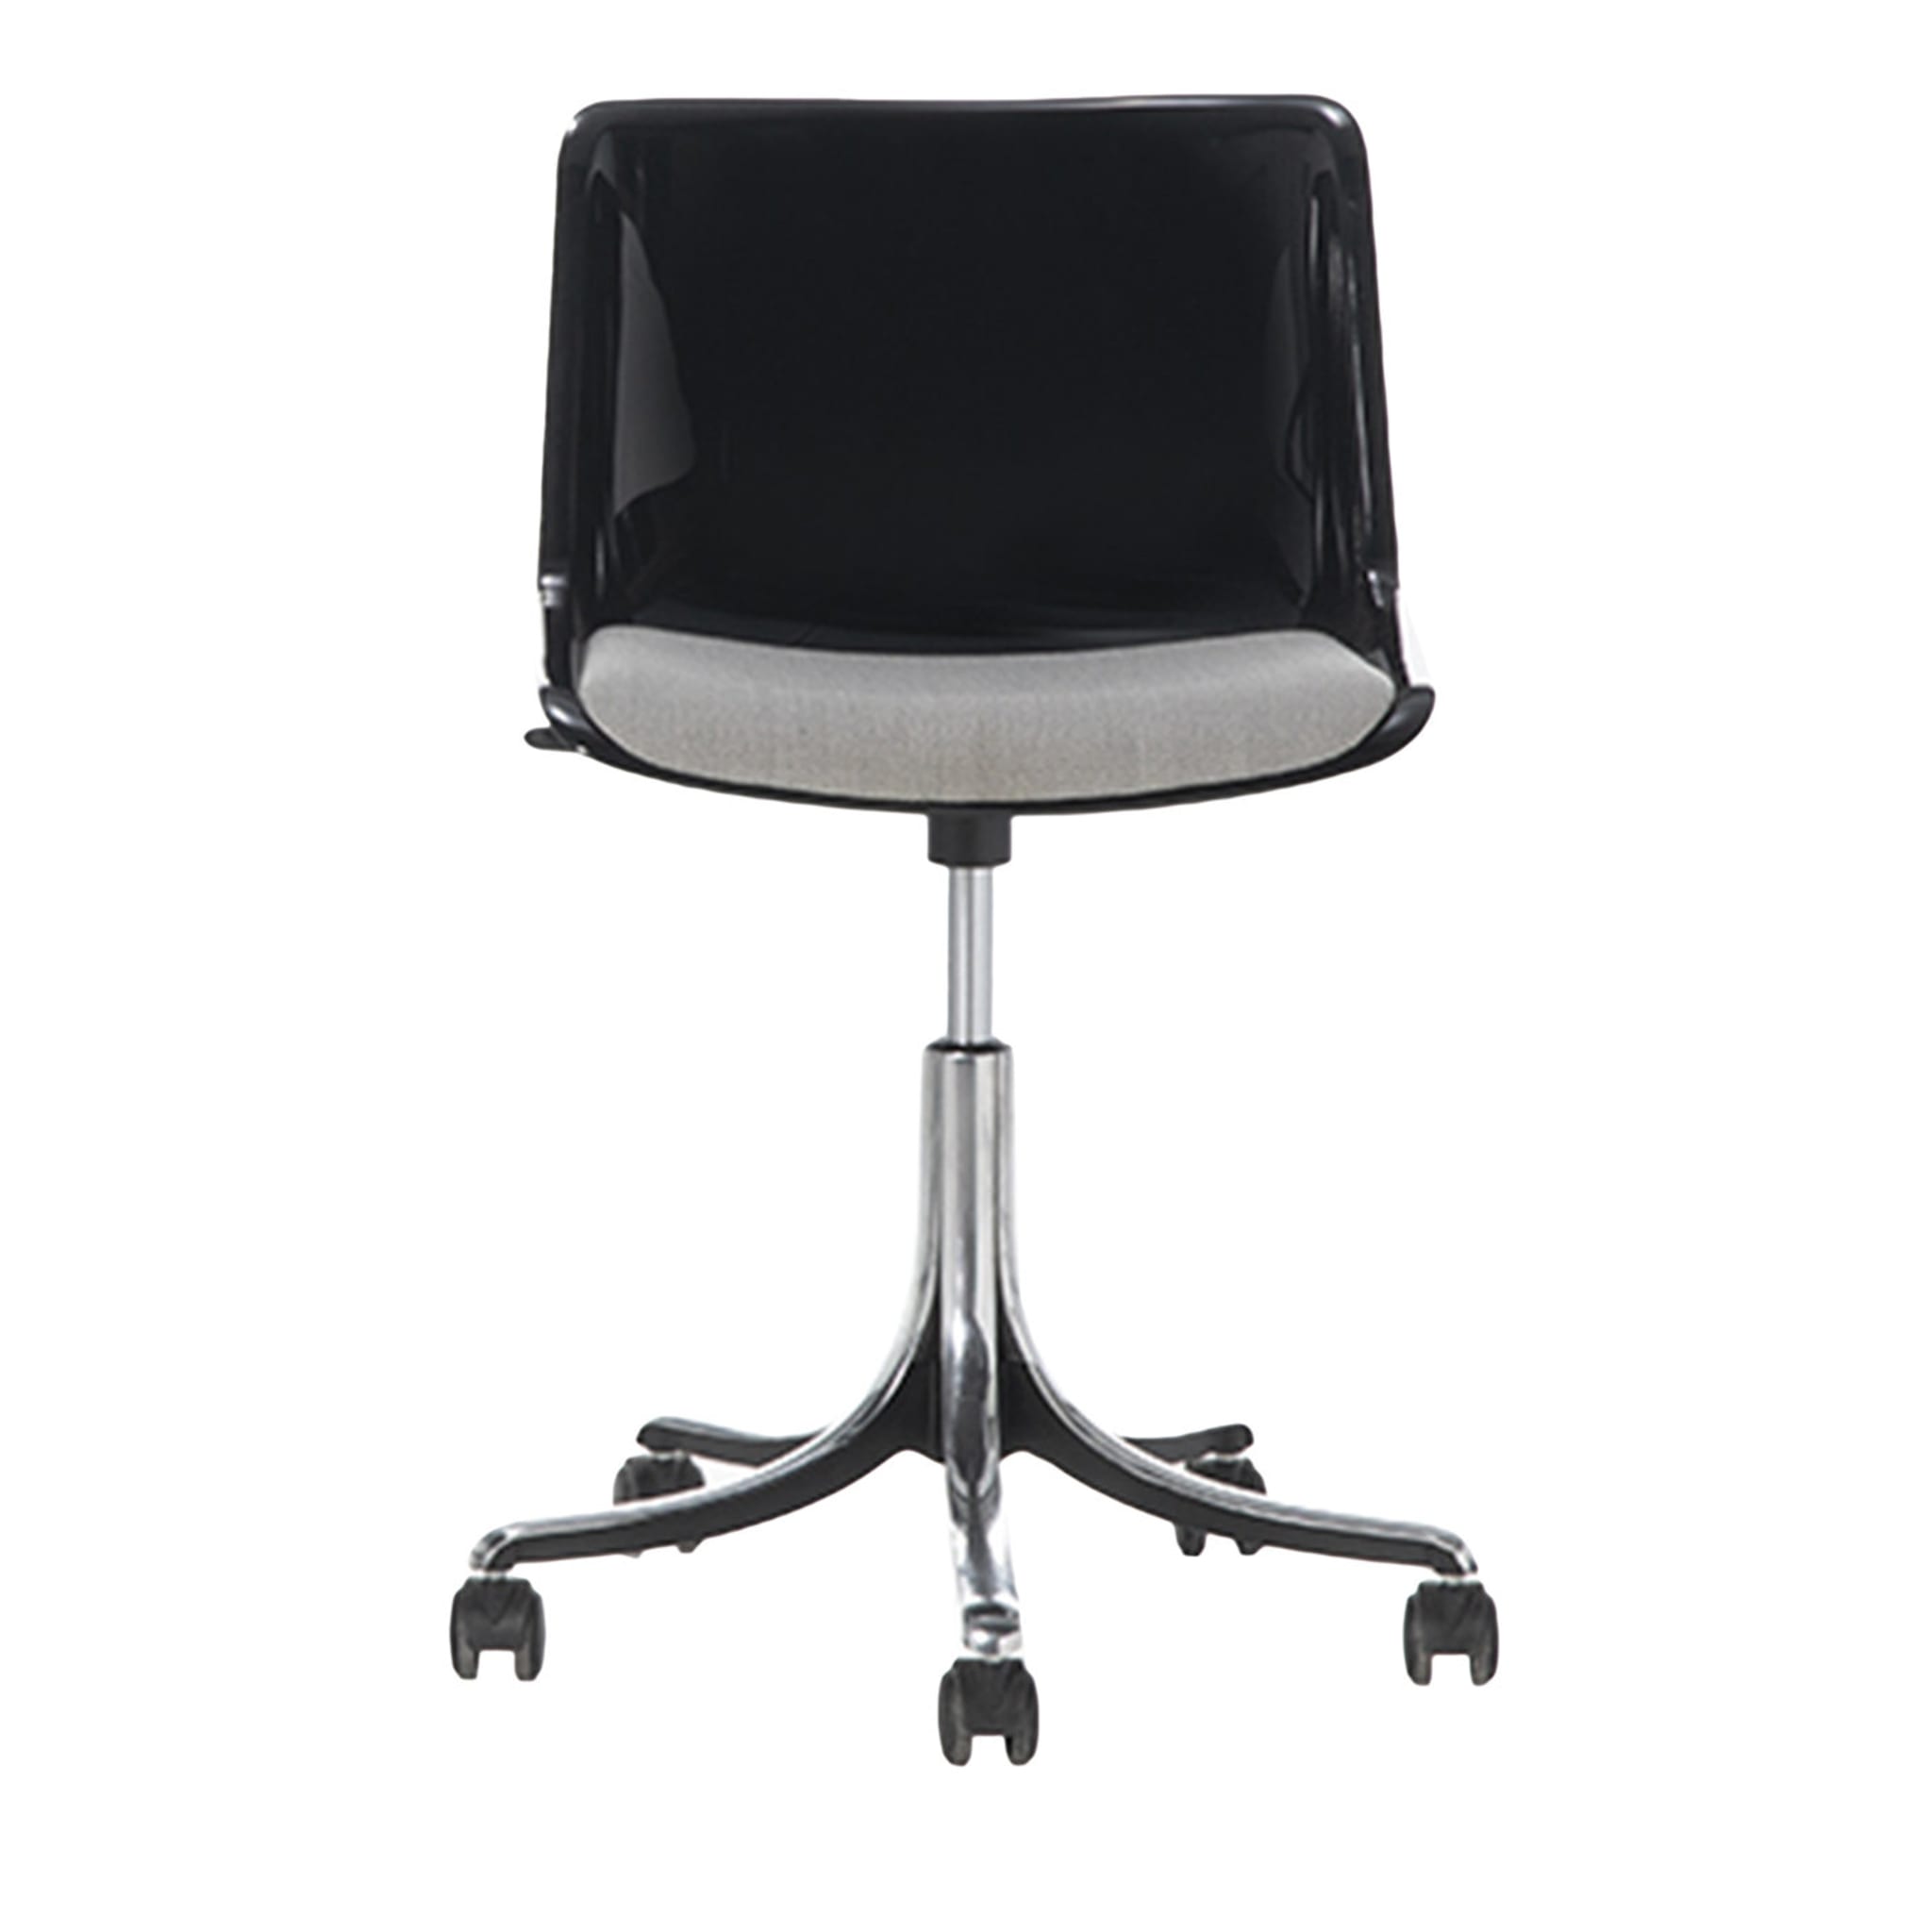 Modus Black Caster Chair with Gray Seat Cushion by Centro Progetti Tecno - Main view